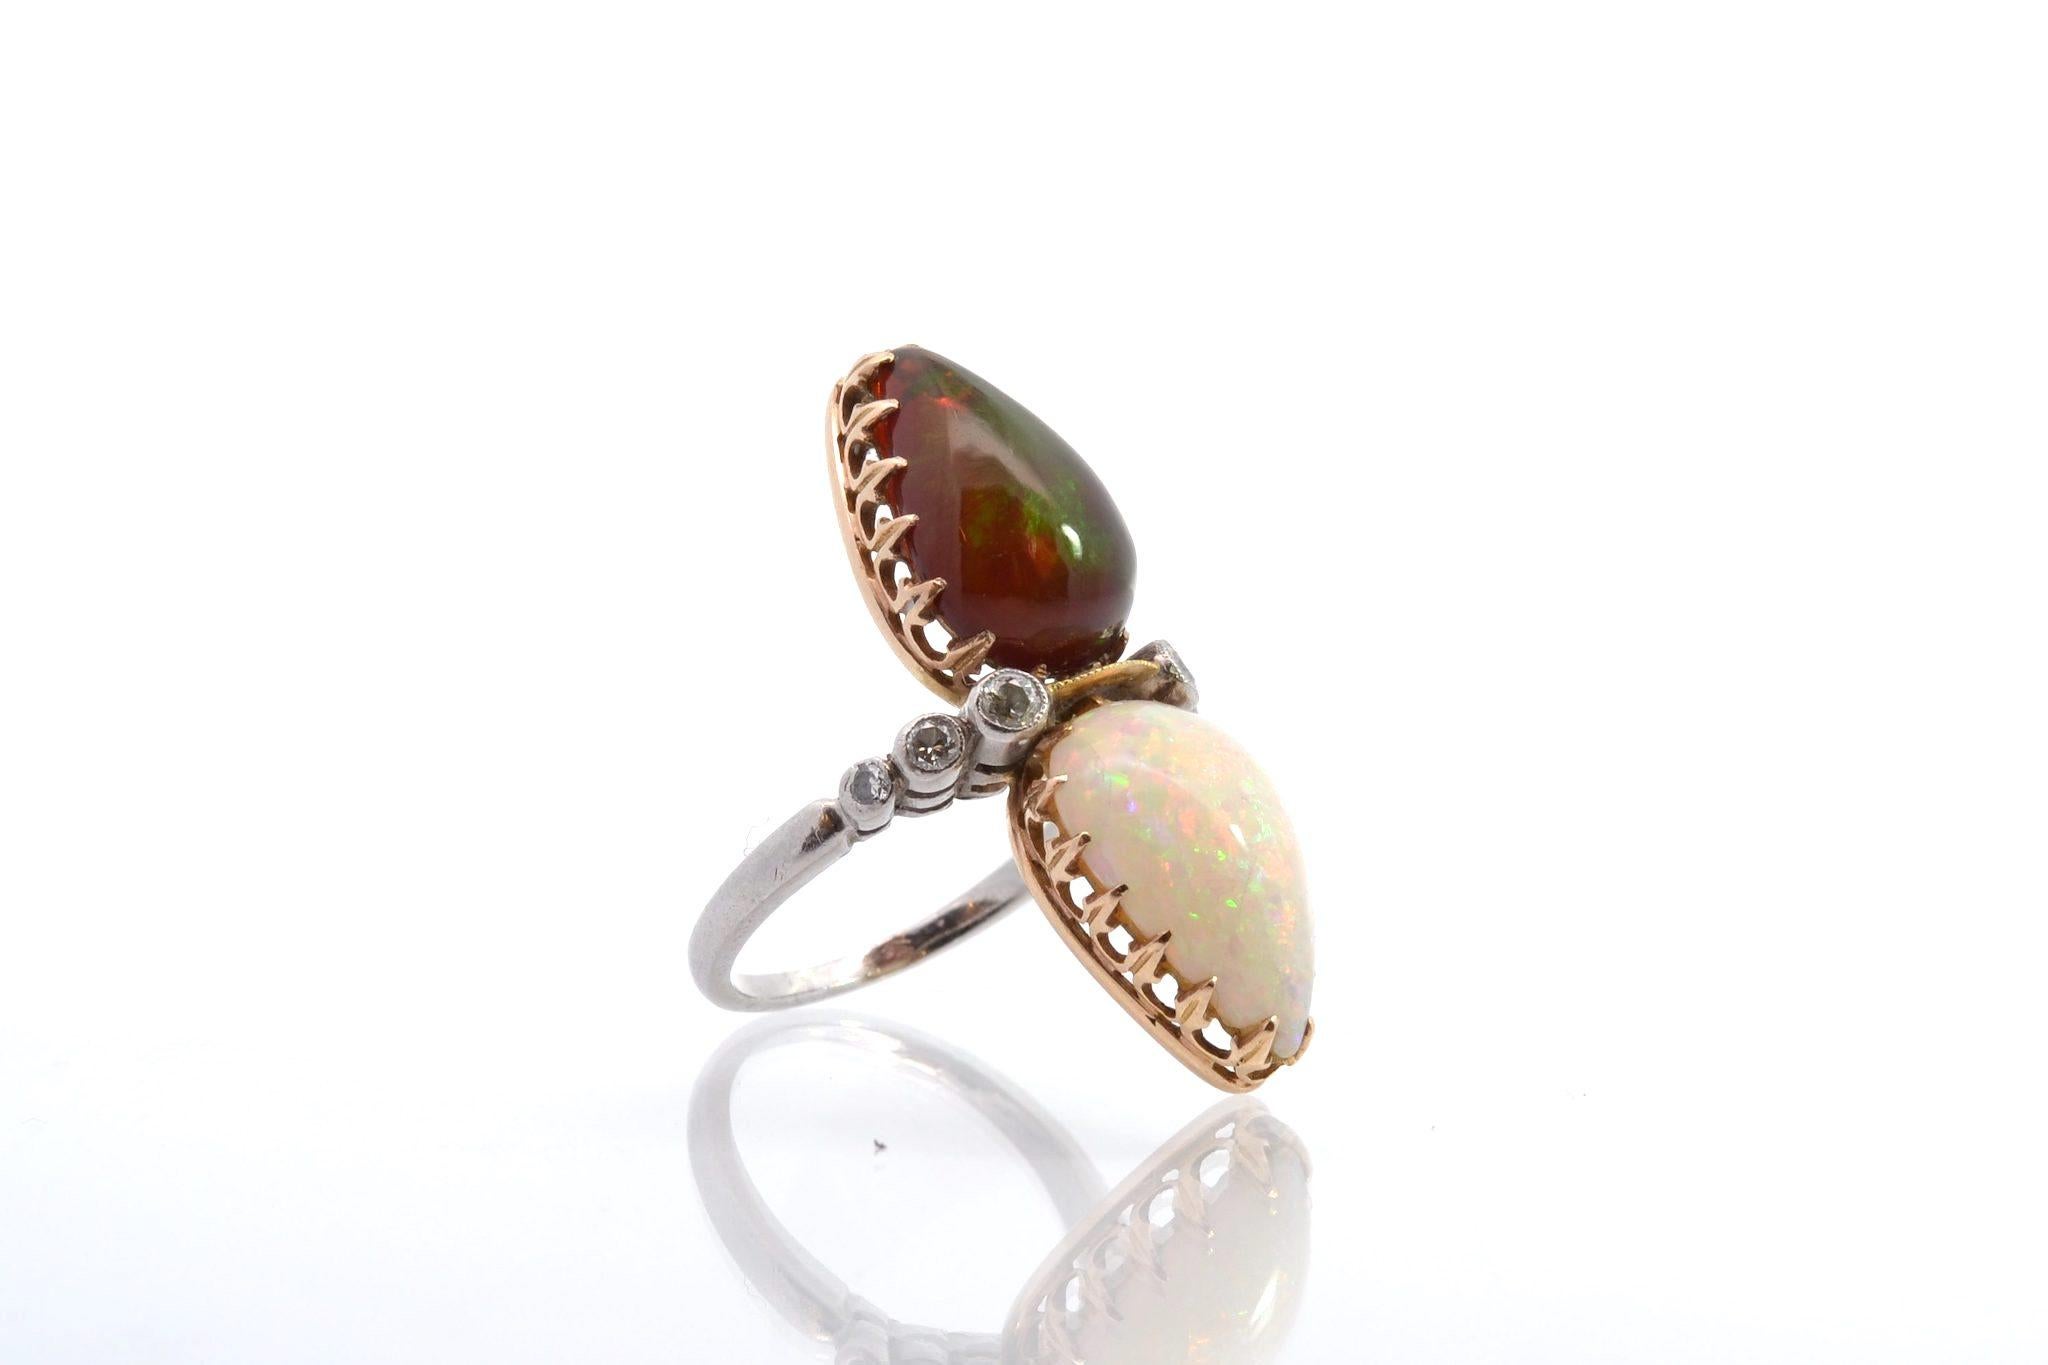 Stones: opals and old cut diamonds
for a total weight of 0.18 carats.
Material: 18k yellow gold and platinum
Dimensions: 3.4 cm length on finger
Weight: 7.6g
Size: 52 (free sizing)
Certificate
Ref. : 24799